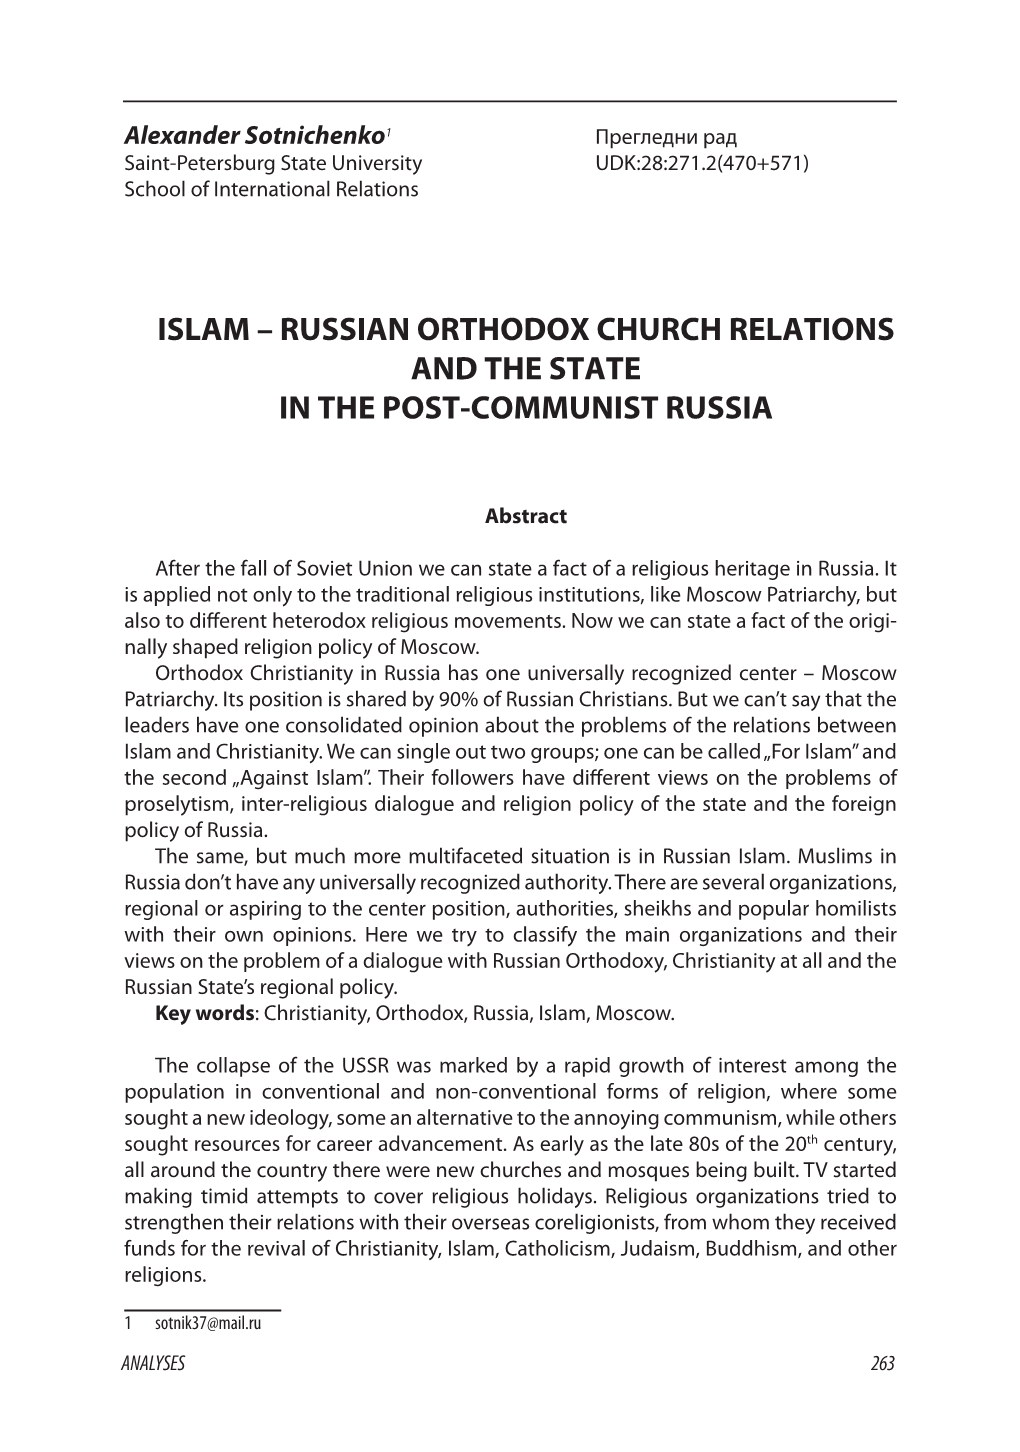 Islam – Russian Orthodox Church Relations and the State in the Post-Communist Russia